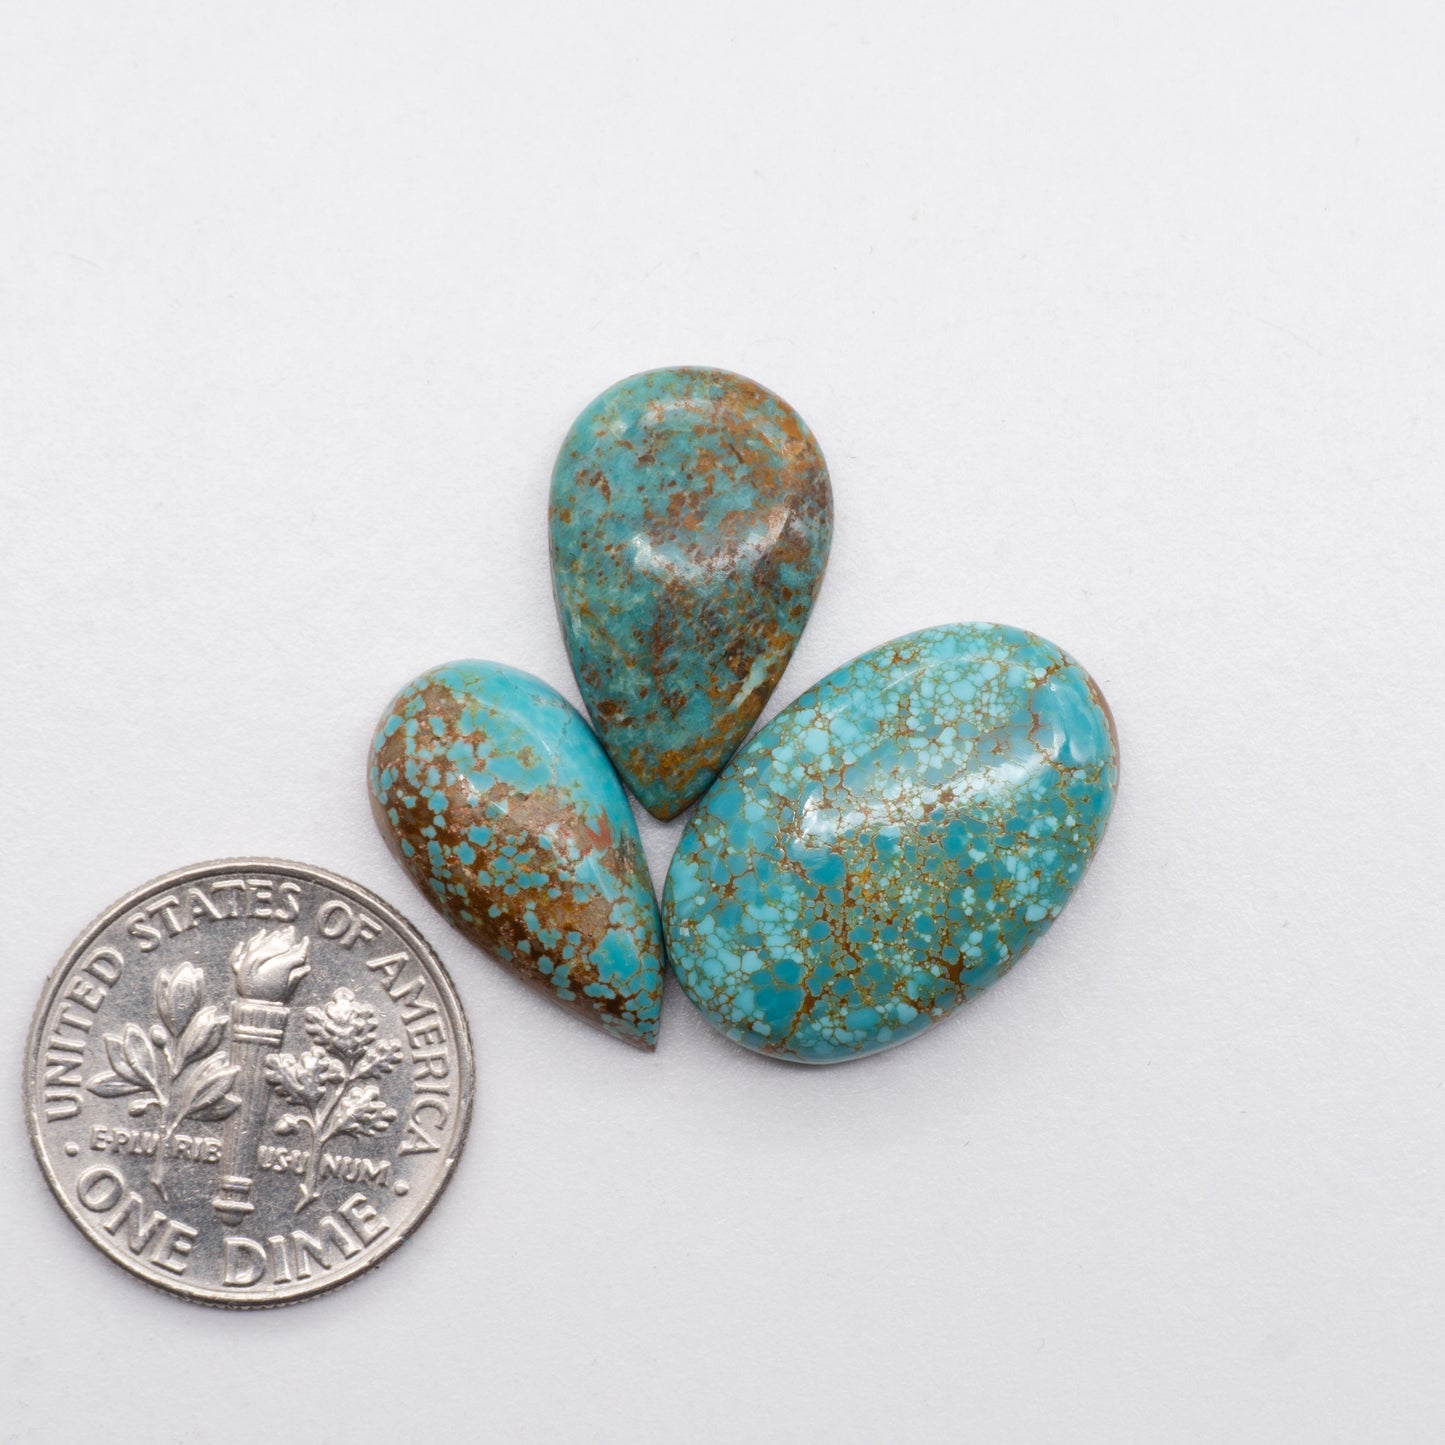 Number 8 Turquoise Cabochons have a glossy finish and are backed for added strength. Number 8 Turquoise is Mined in Nevada, USA. Number 8 Turquoise is similar to Royston & Kingman Turquoise and used for jewelry making.